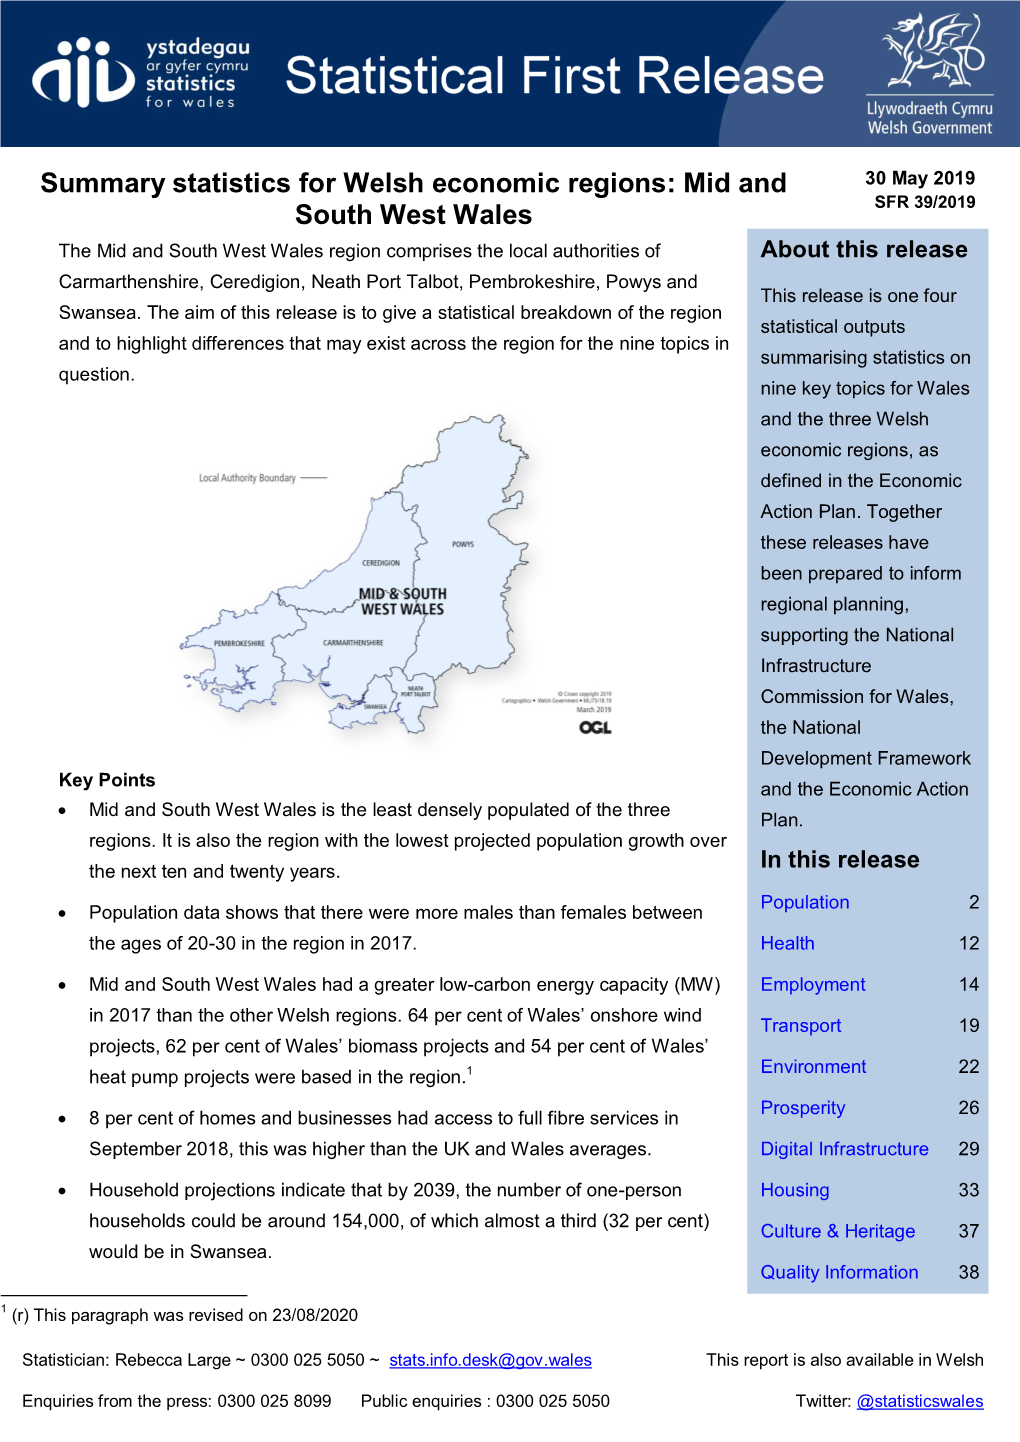 Summary Statistics for Welsh Economic Regions: Mid and South